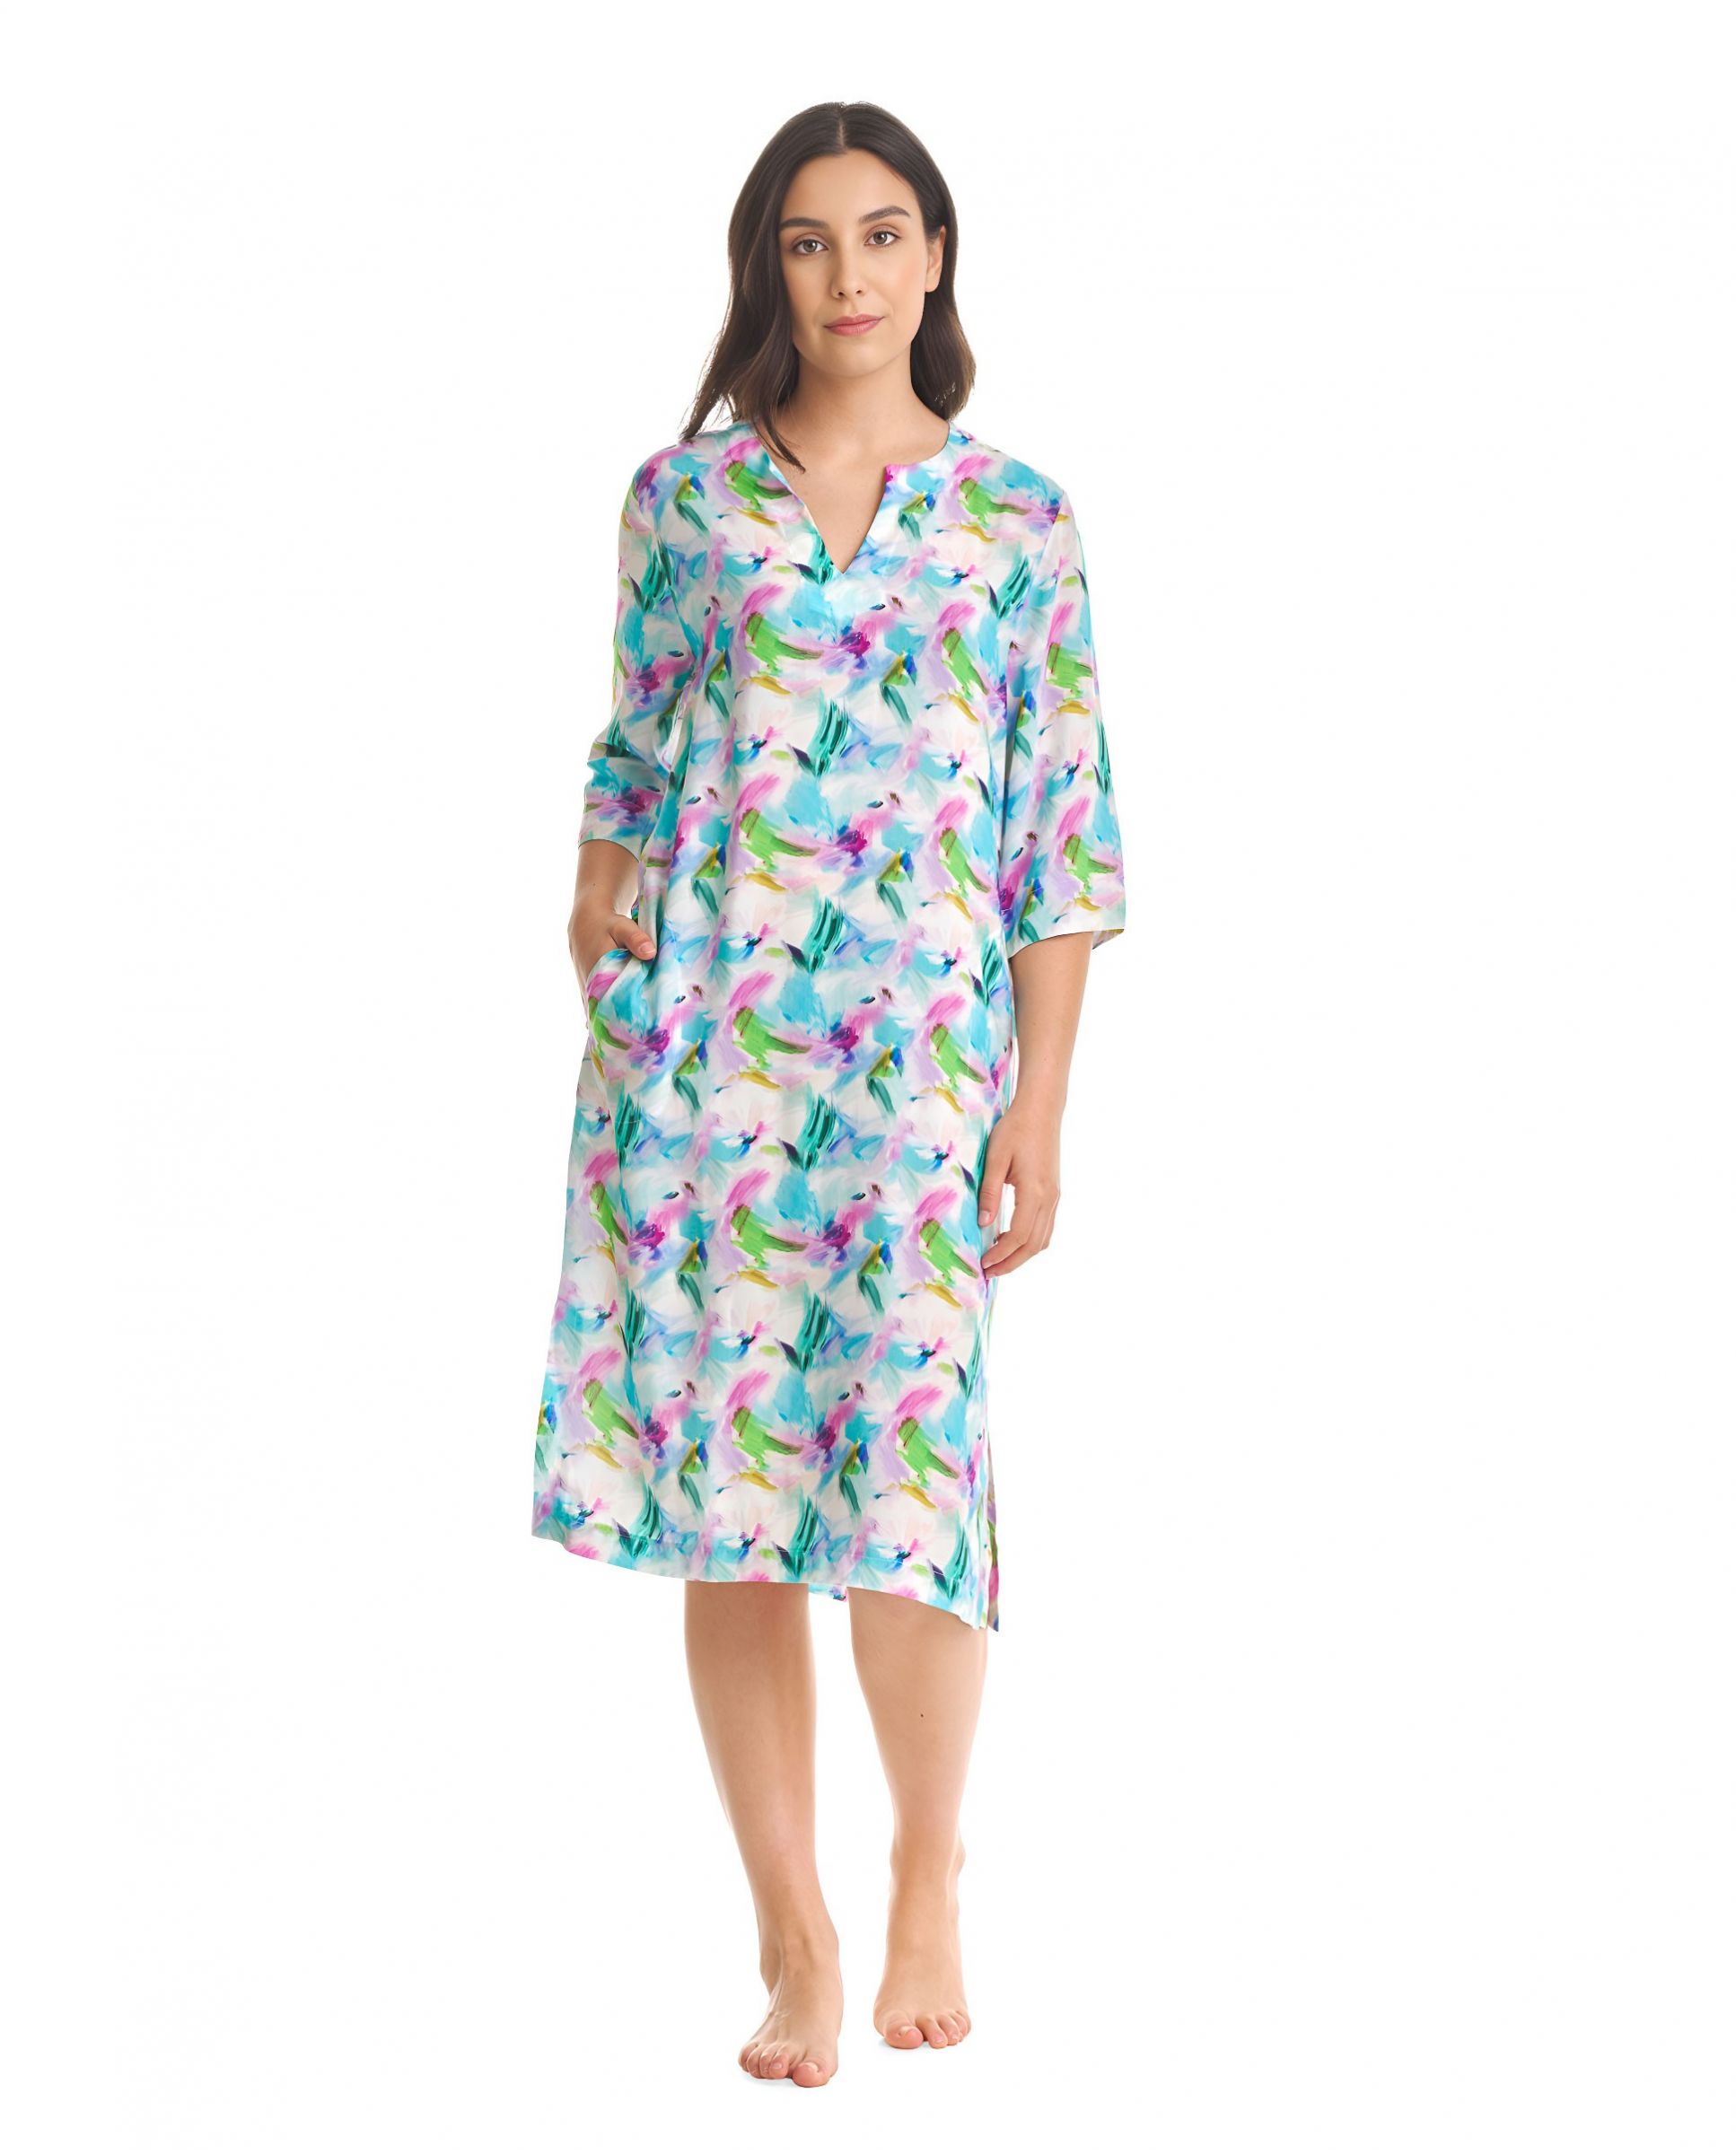 Short beach dress with short sleeves. V-neck and colourful floral print.